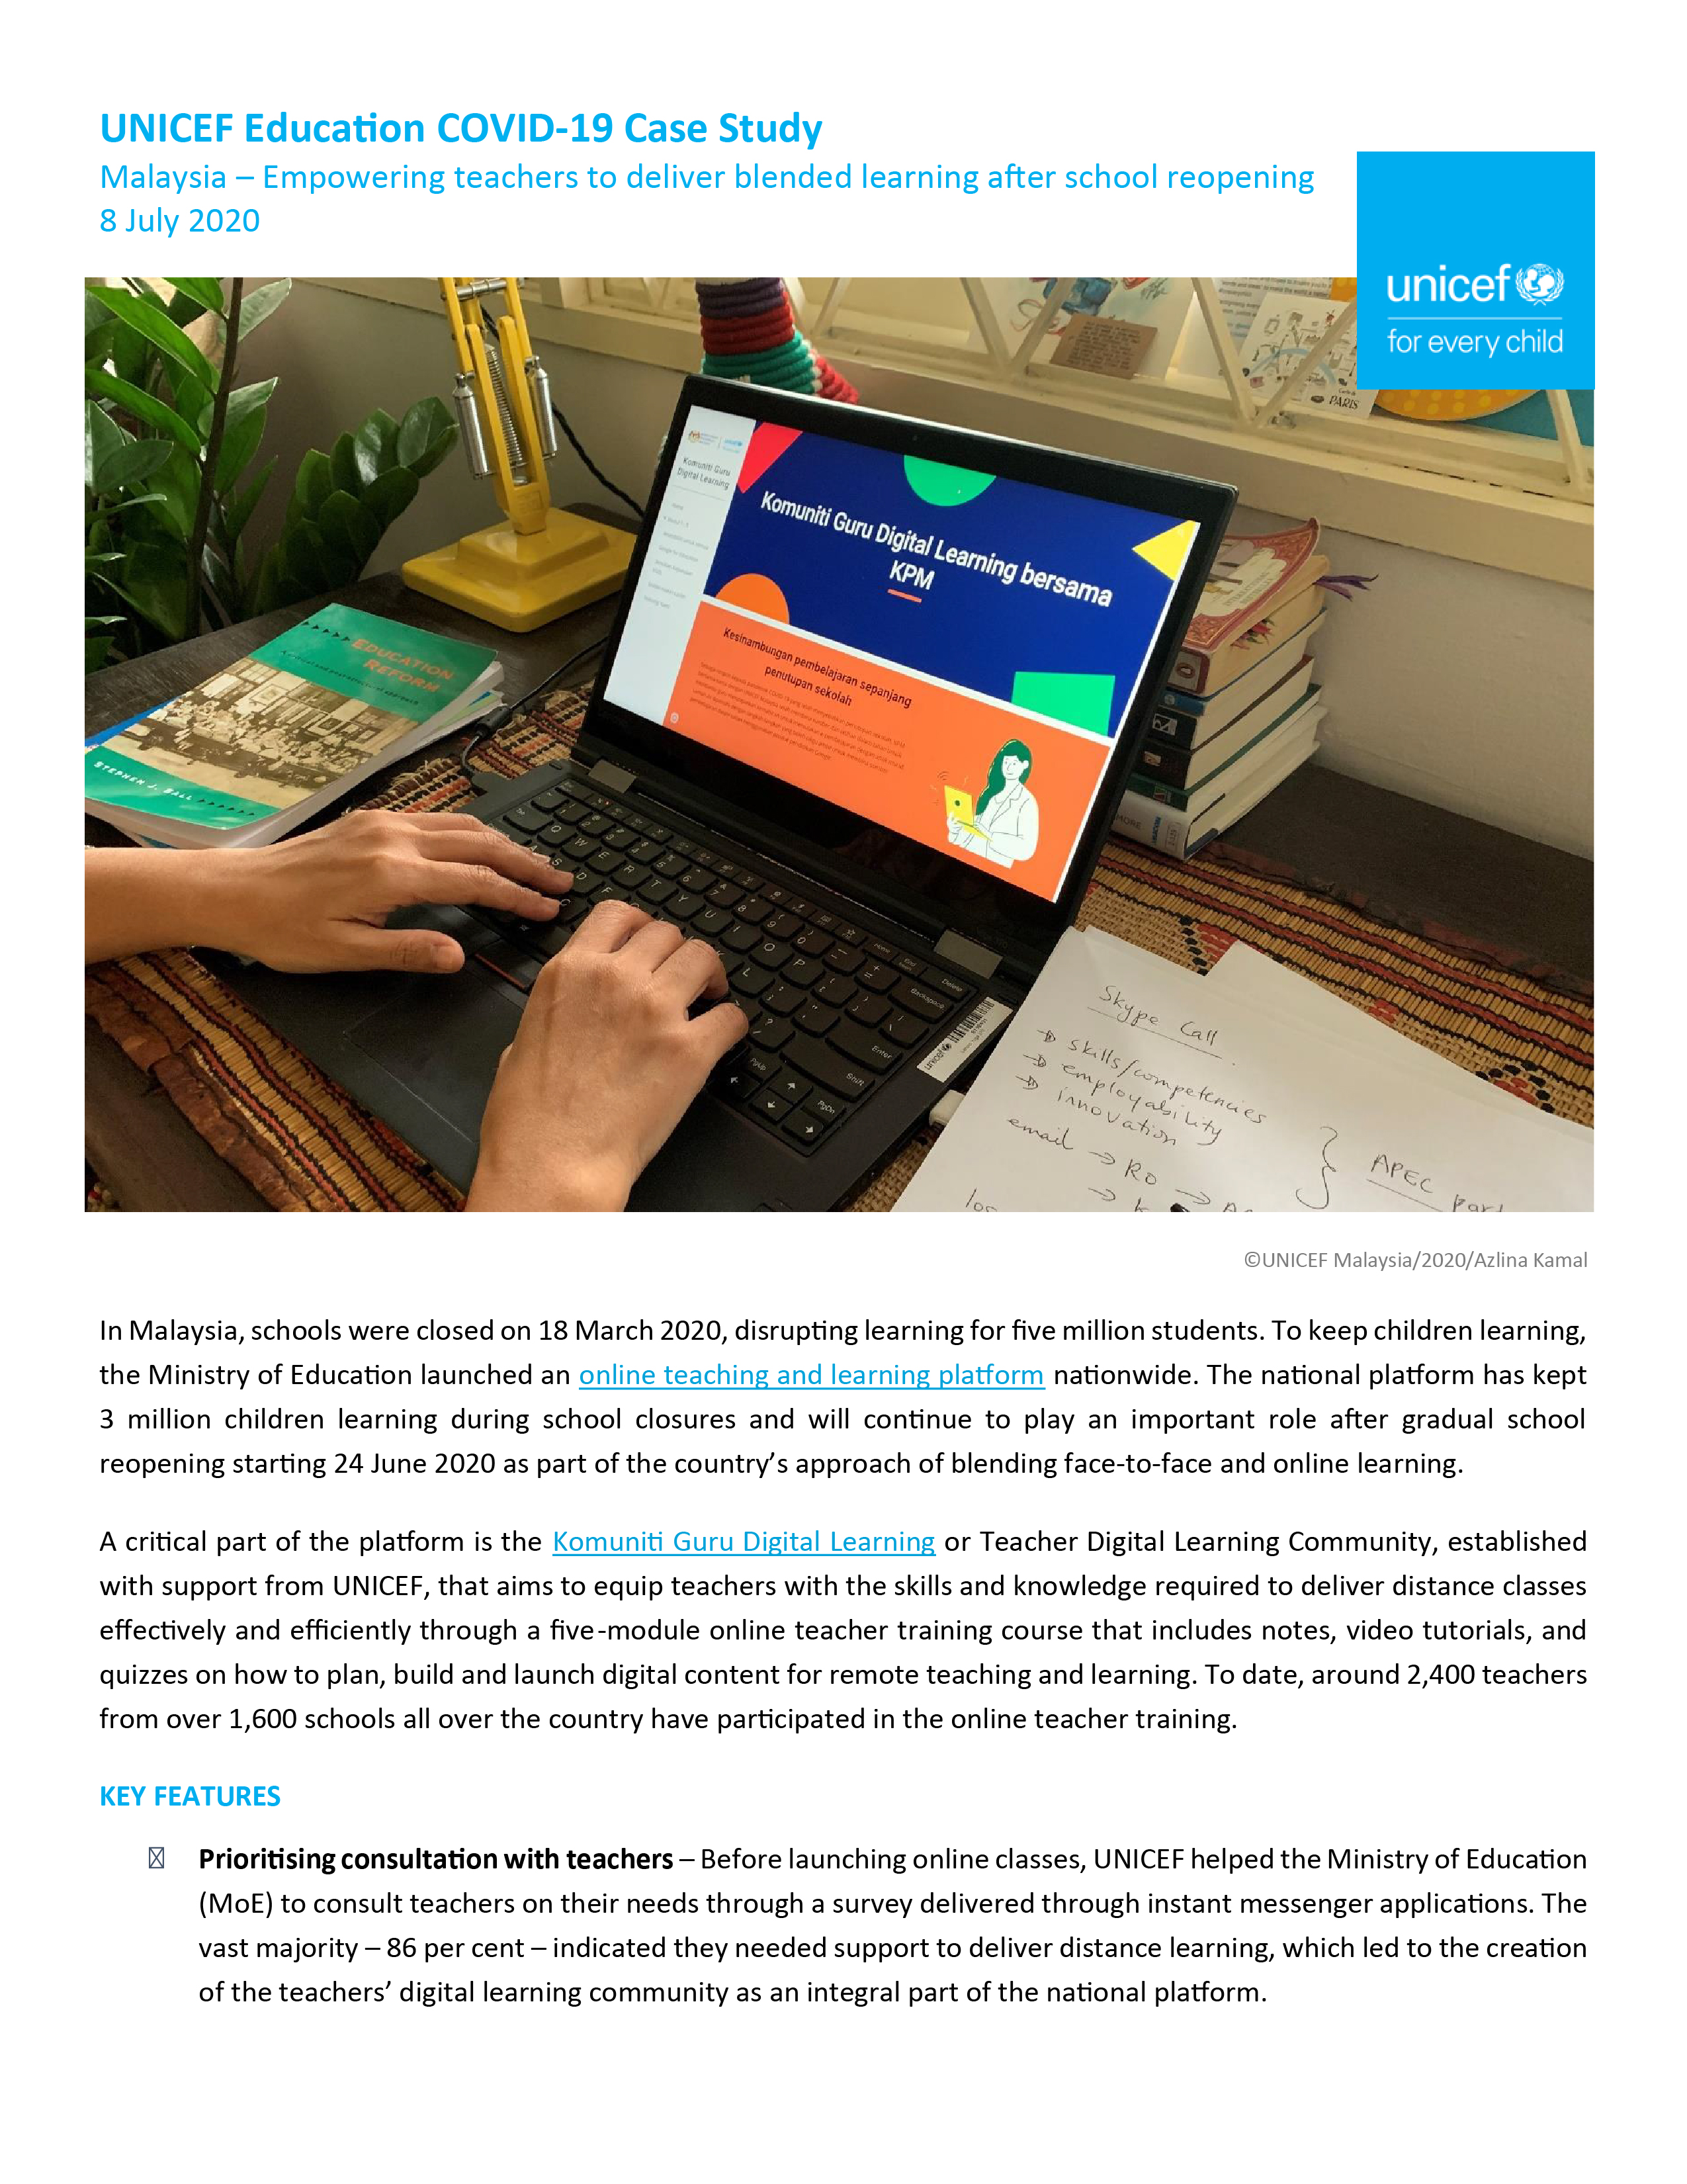 UNICEF Education COVID-19 Case Study: Empowering teachers to deliver blended learning after school reopening in Malaysia (July 2020)